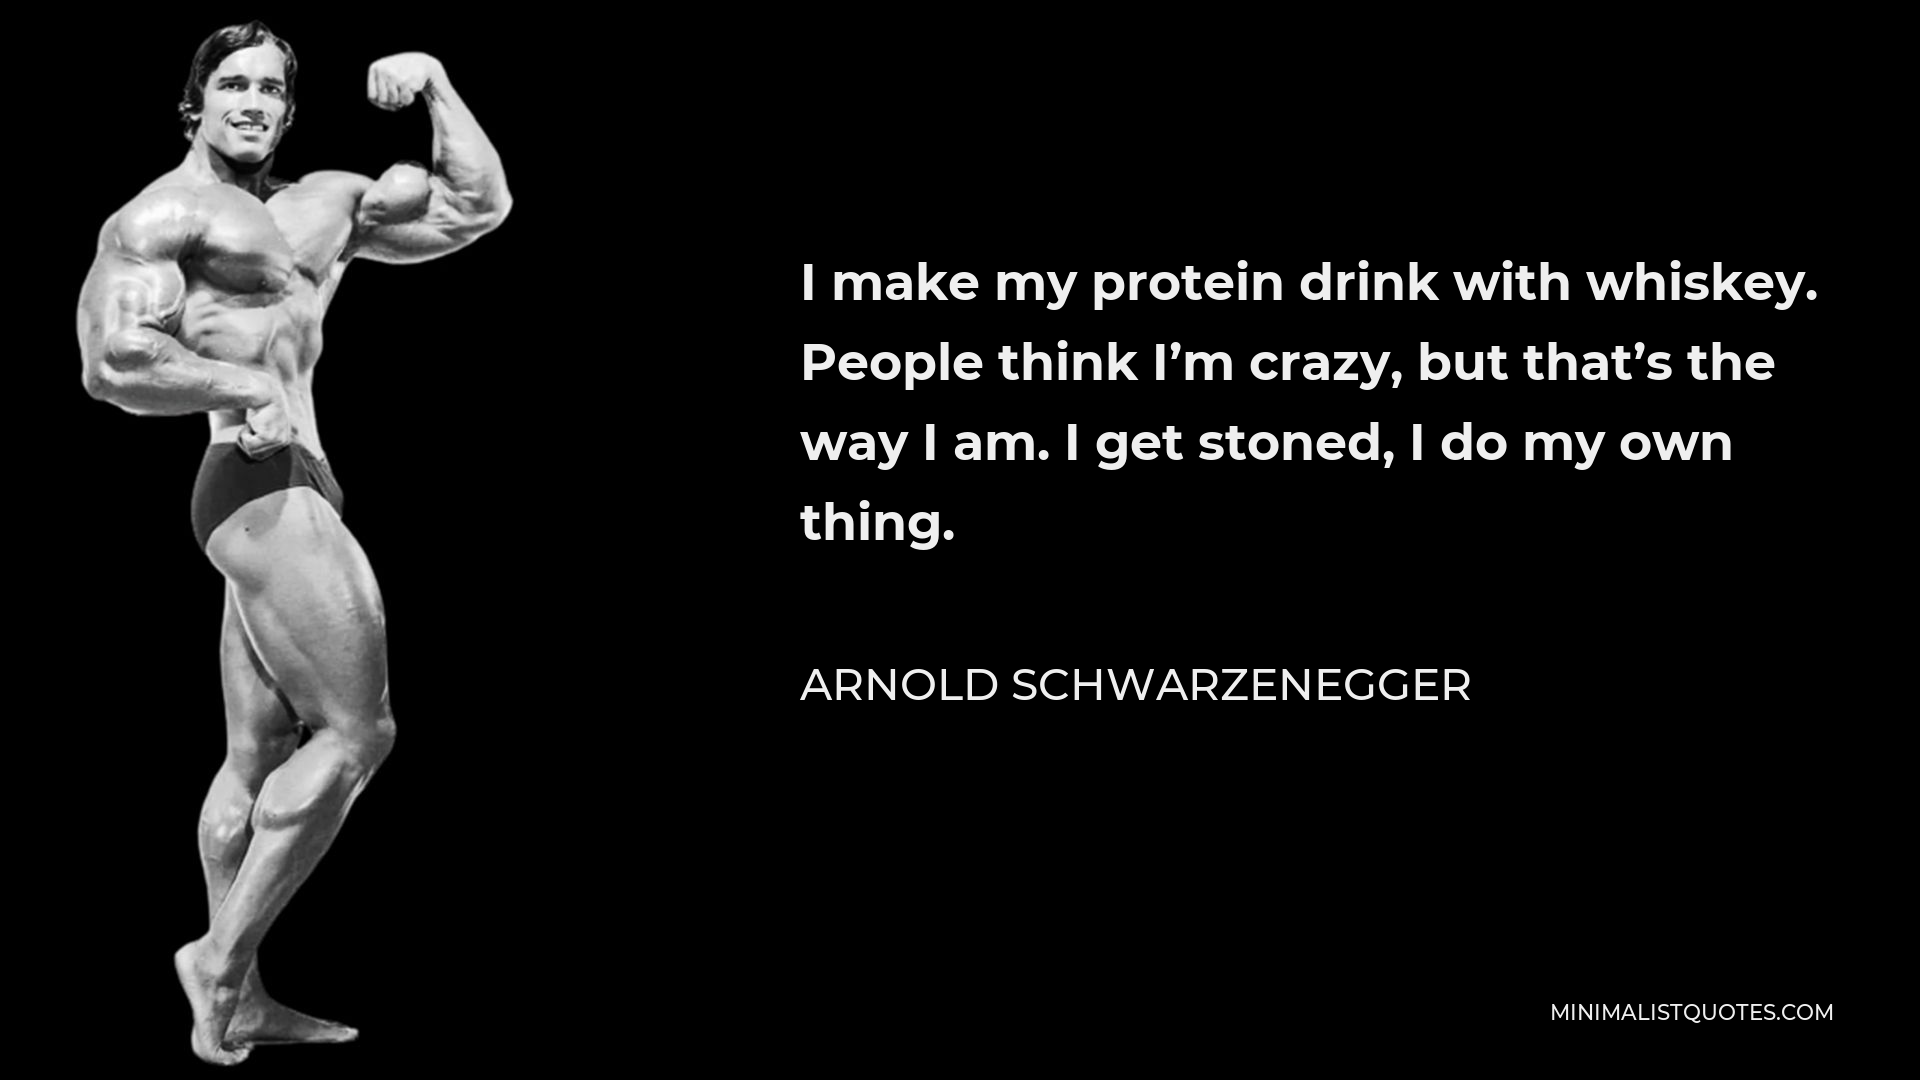 Arnold Schwarzenegger Quote - I make my protein drink with whiskey. People think I’m crazy, but that’s the way I am. I get stoned, I do my own thing.